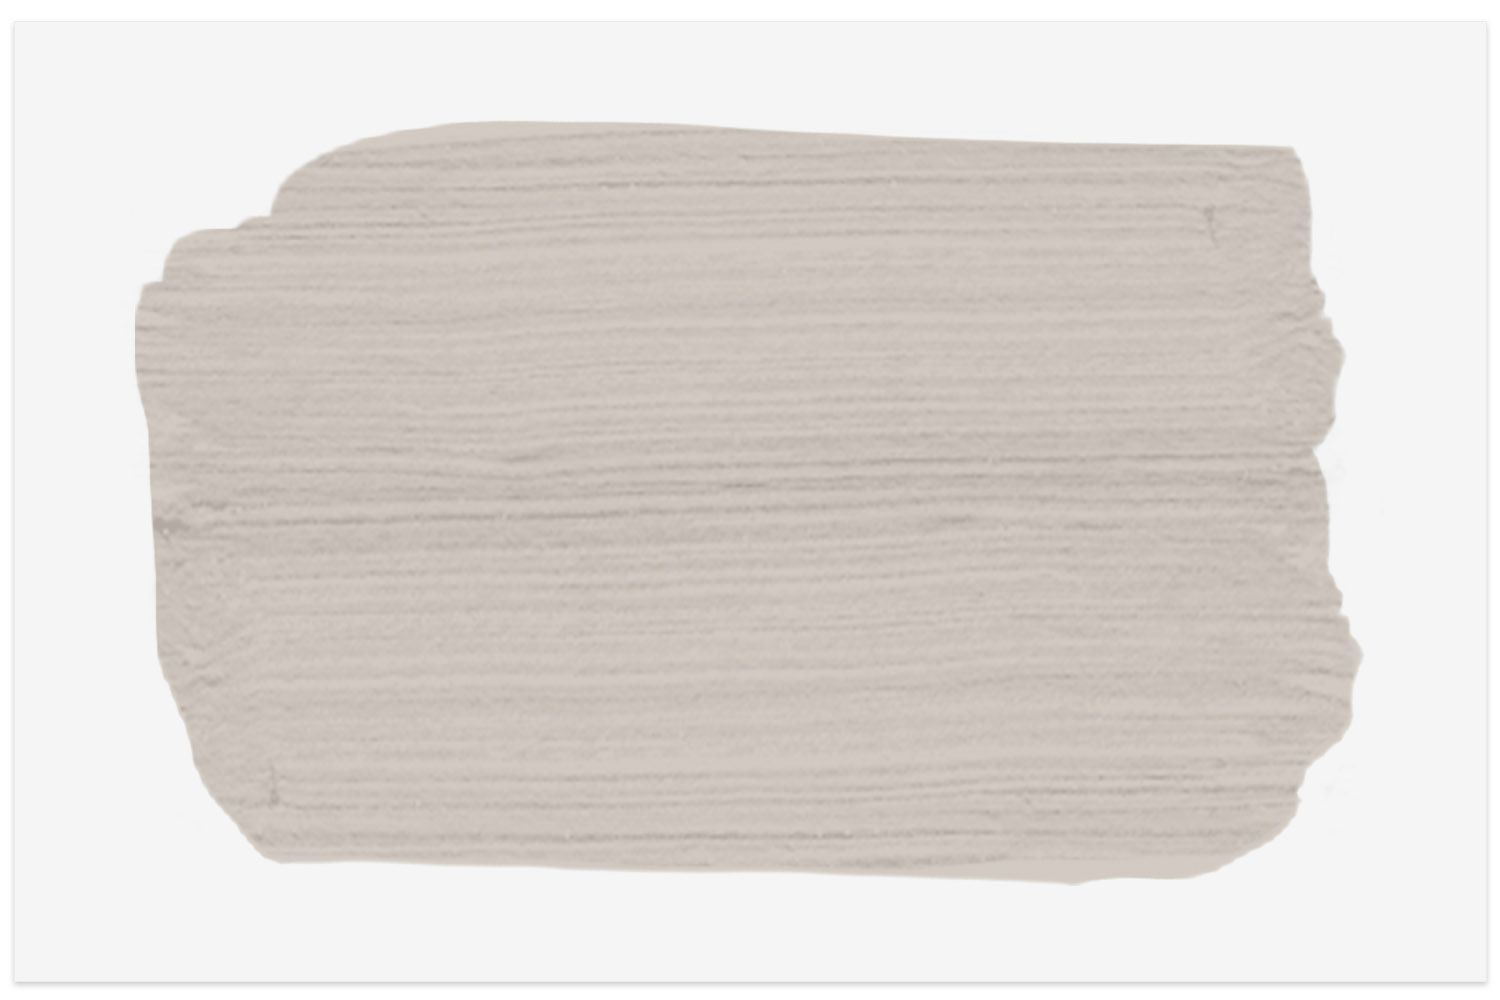 Ashen Tan N220-2 paint swatch from Behr